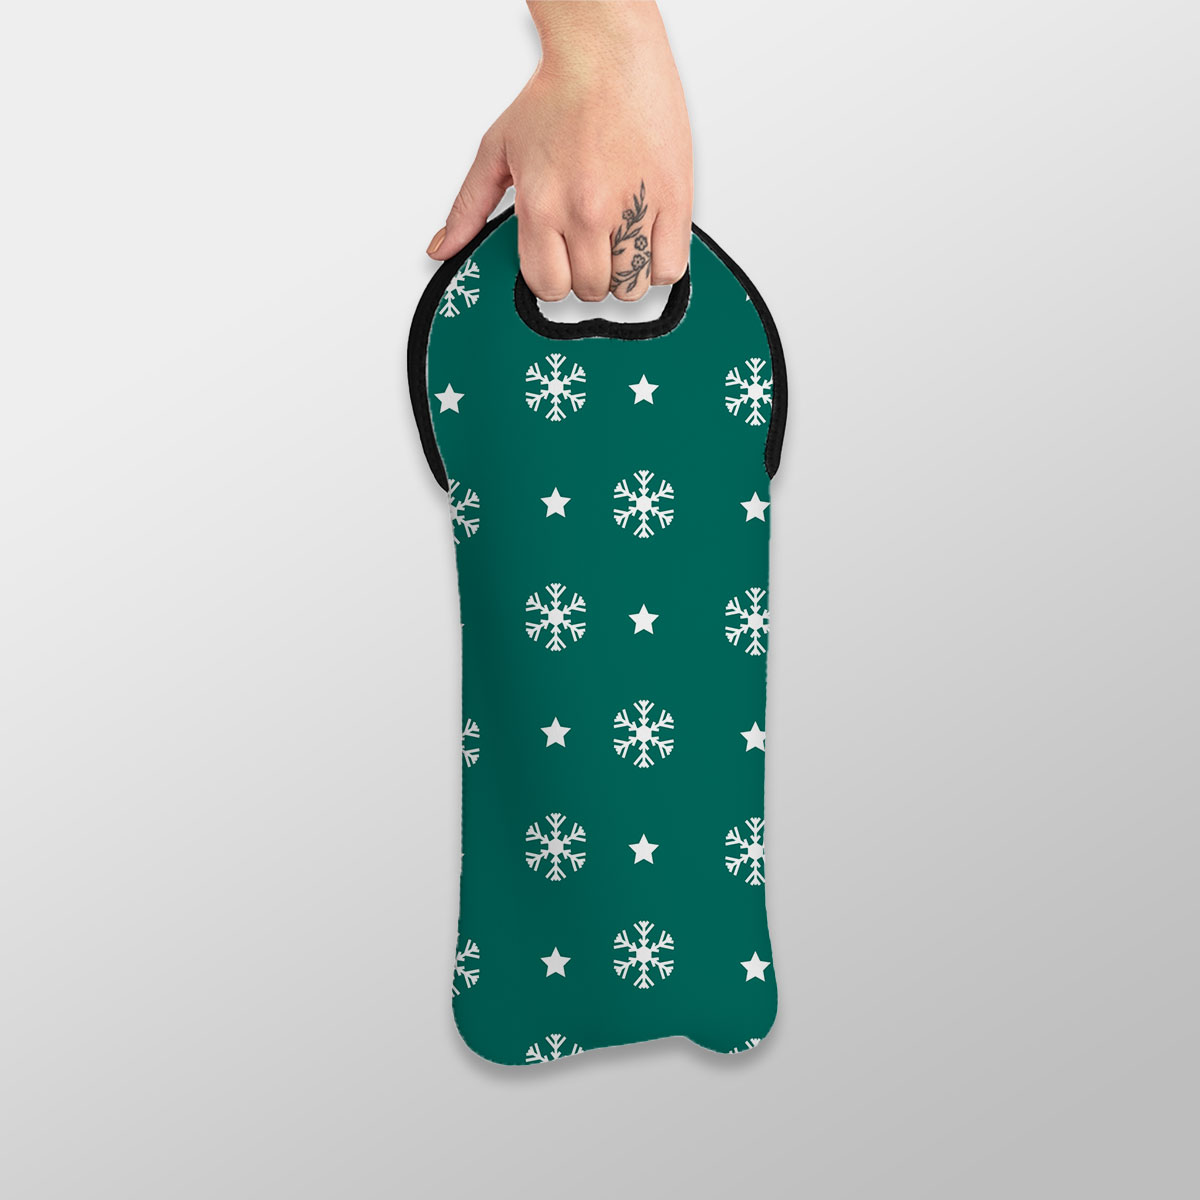 White And Dark Green Snowflake With Christmas Star Wine Tote Bag